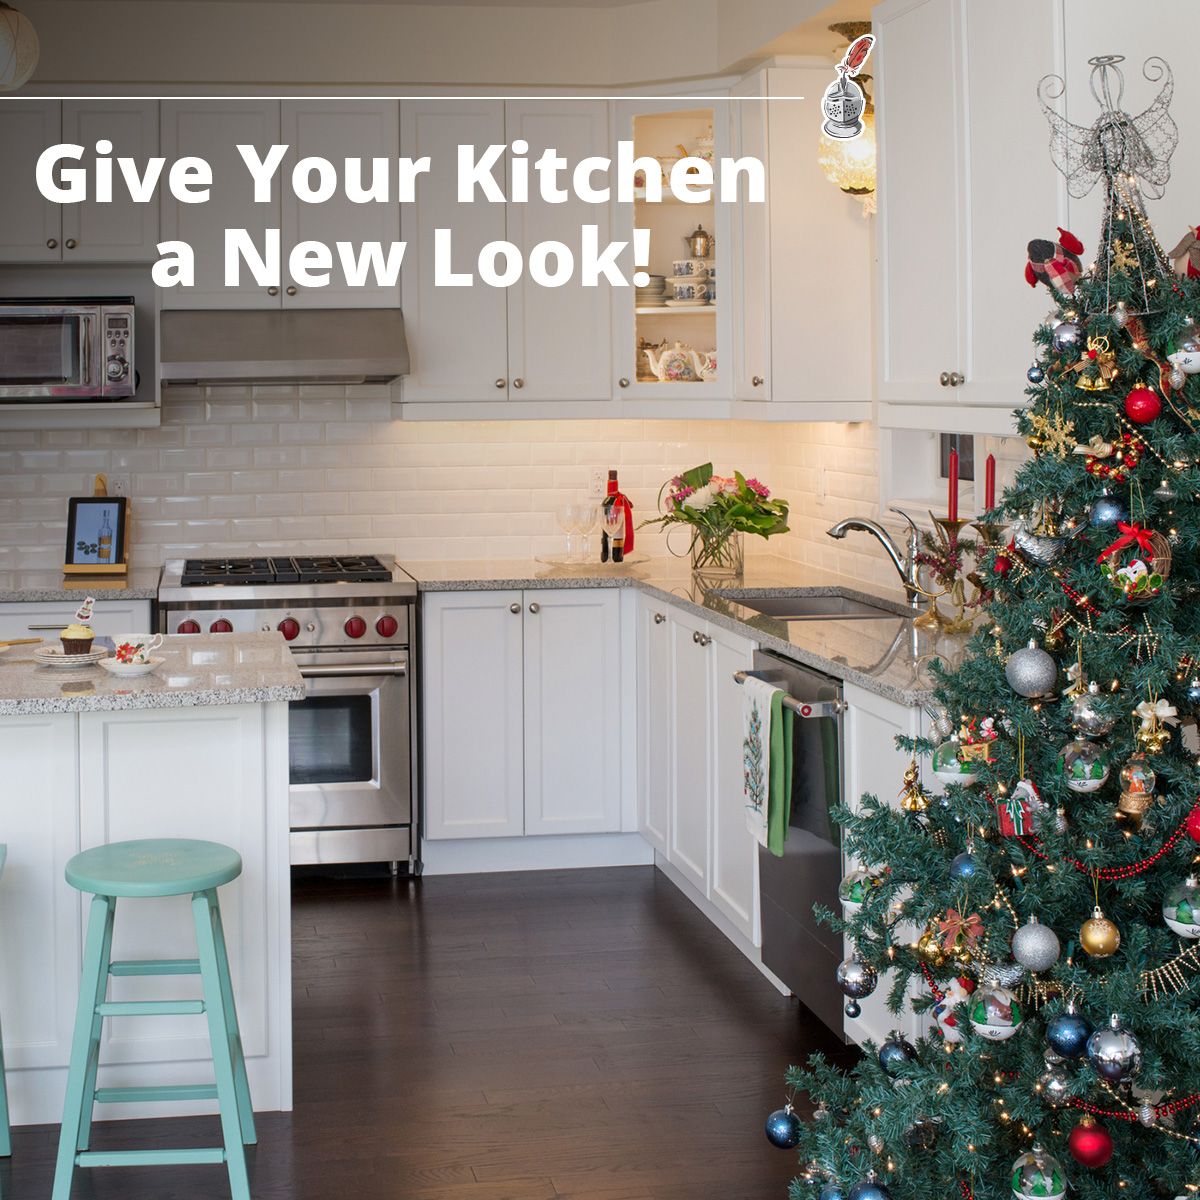 Give Your Kitchen a New Look!